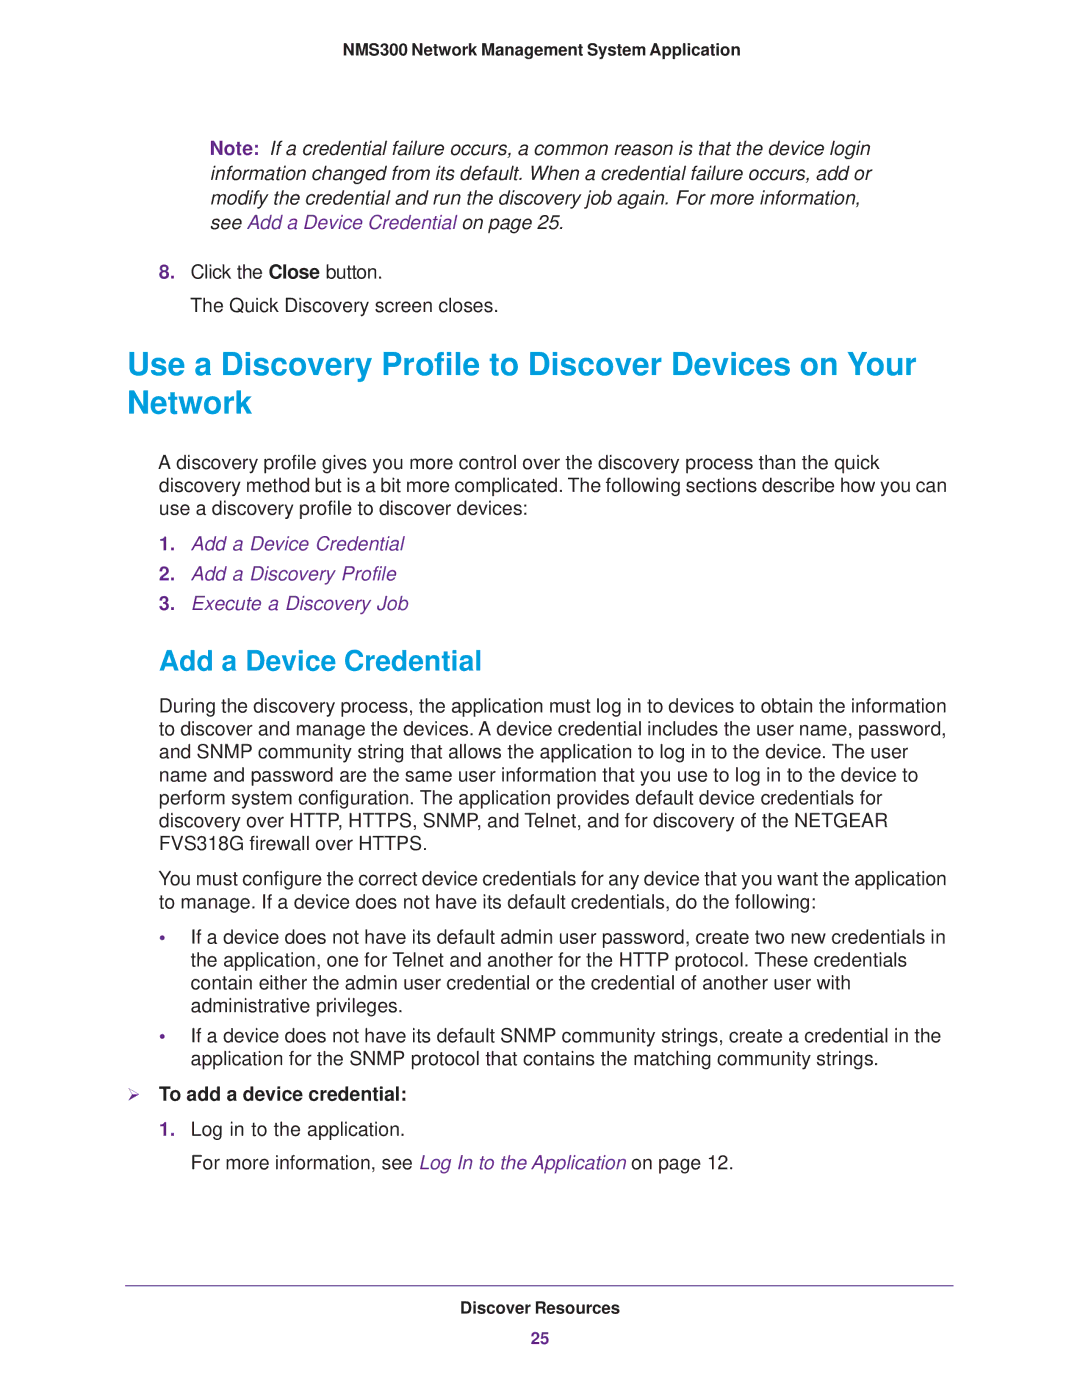 NETGEAR 202-11288-02 quick start Use a Discovery Profile to Discover Devices on Your Network, Add a Device Credential 